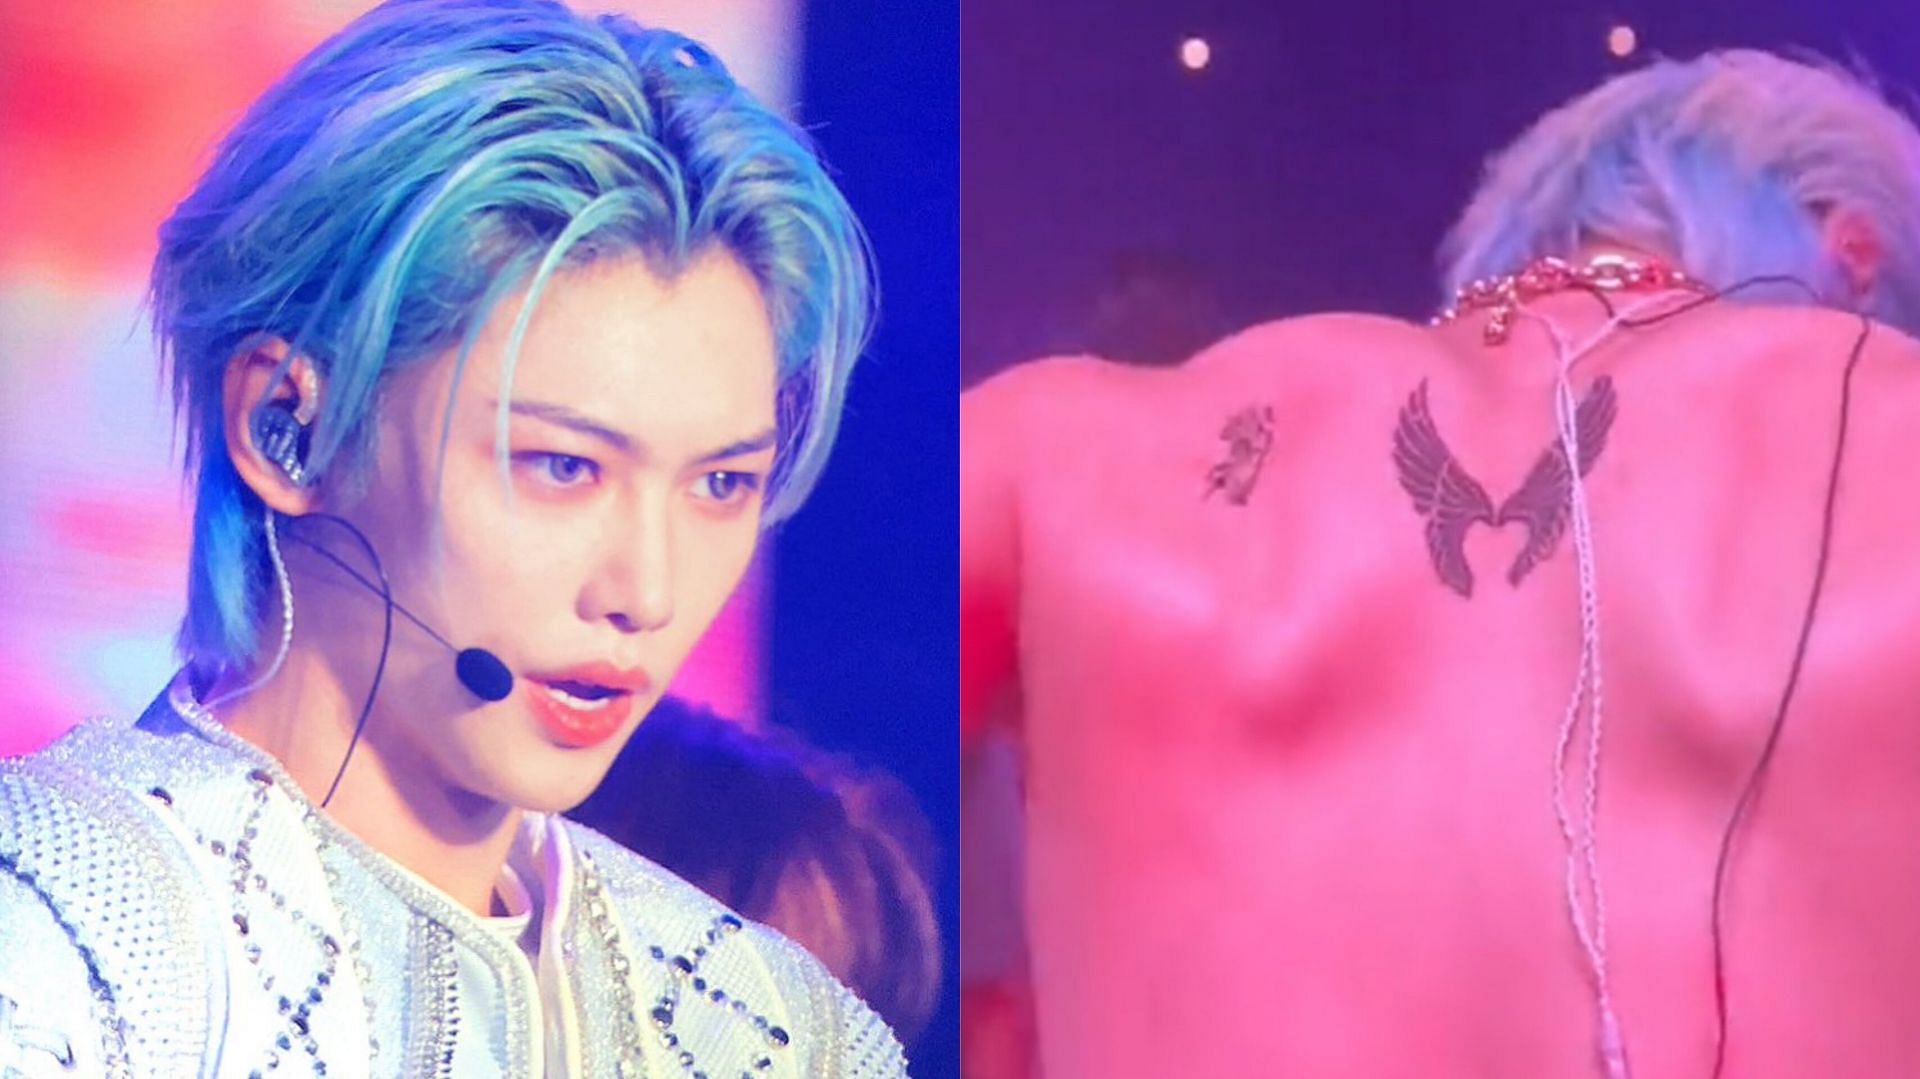 Featuring Felix revealing his tattoo at Stray Kids concert (Image via hwgflx and Flash_felix0915@Twitter)